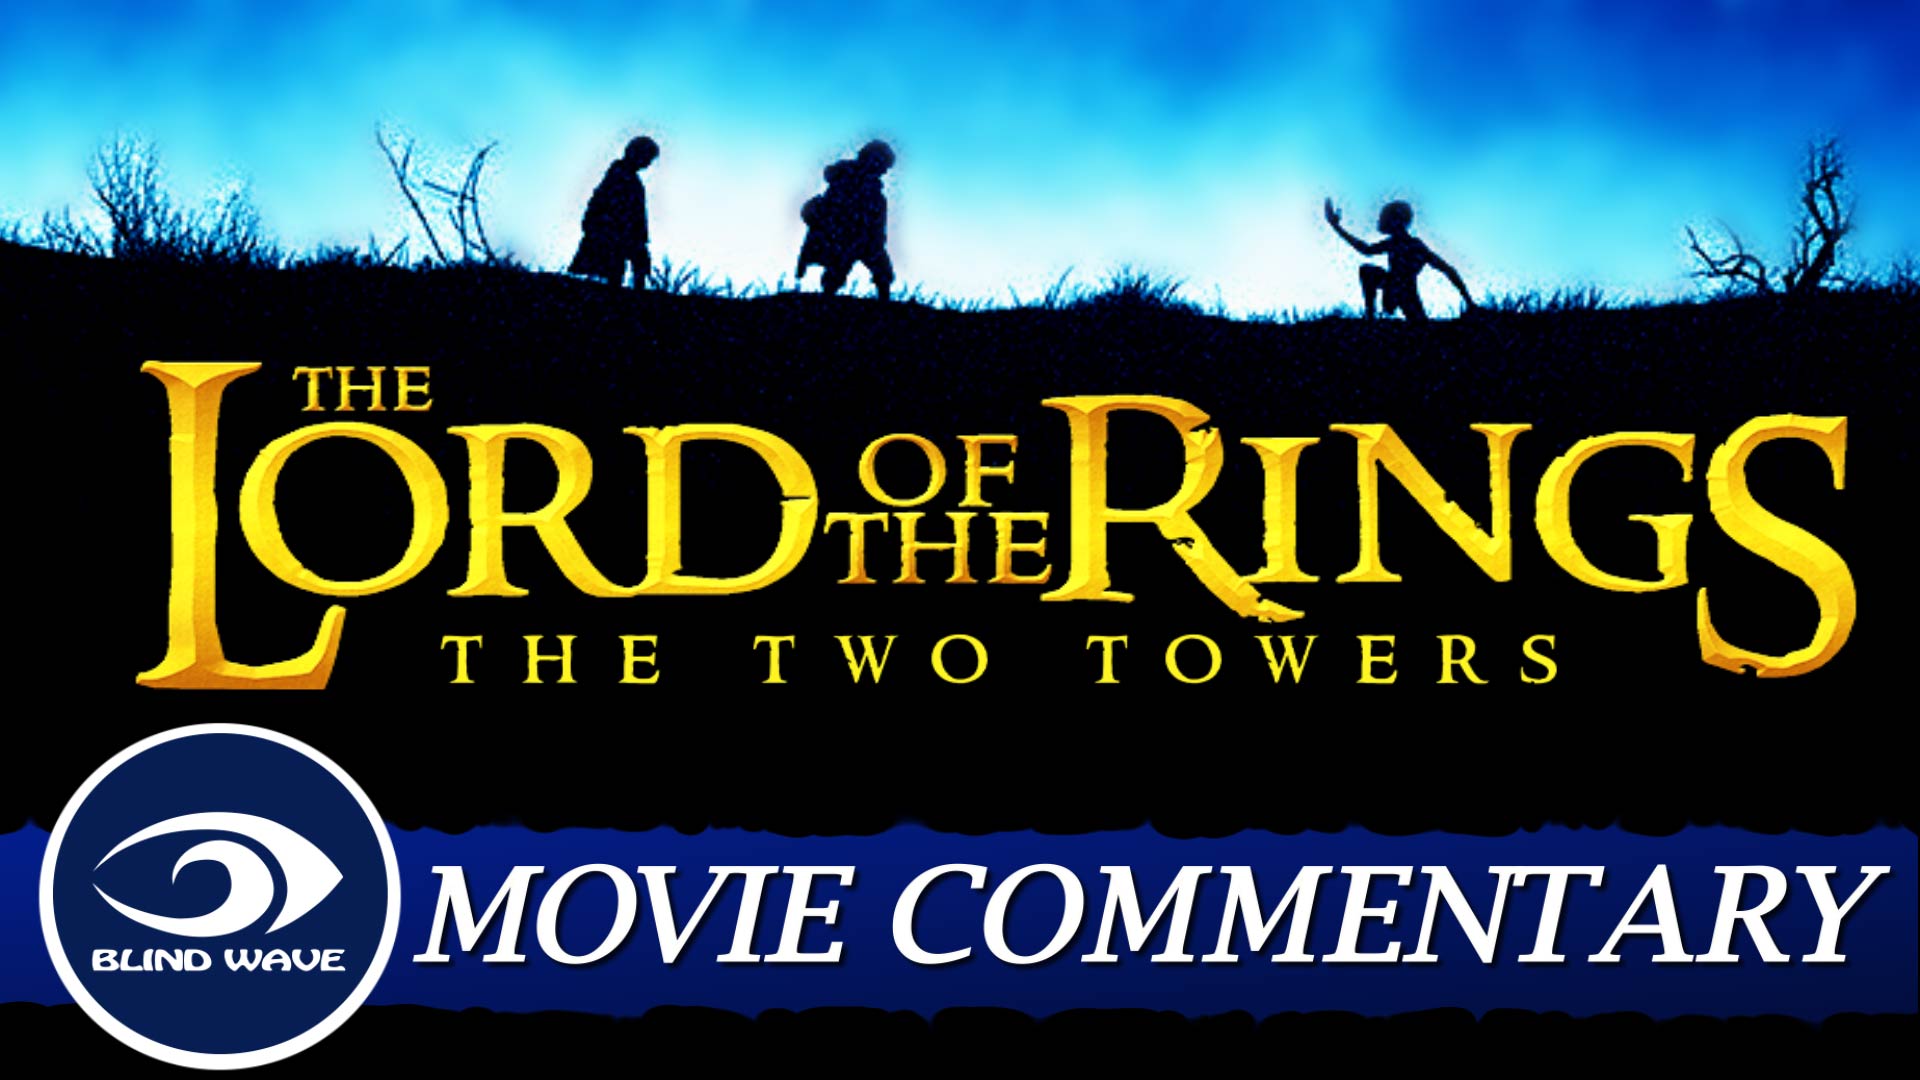 Lotr The Two Towers Commentary Blind Wave